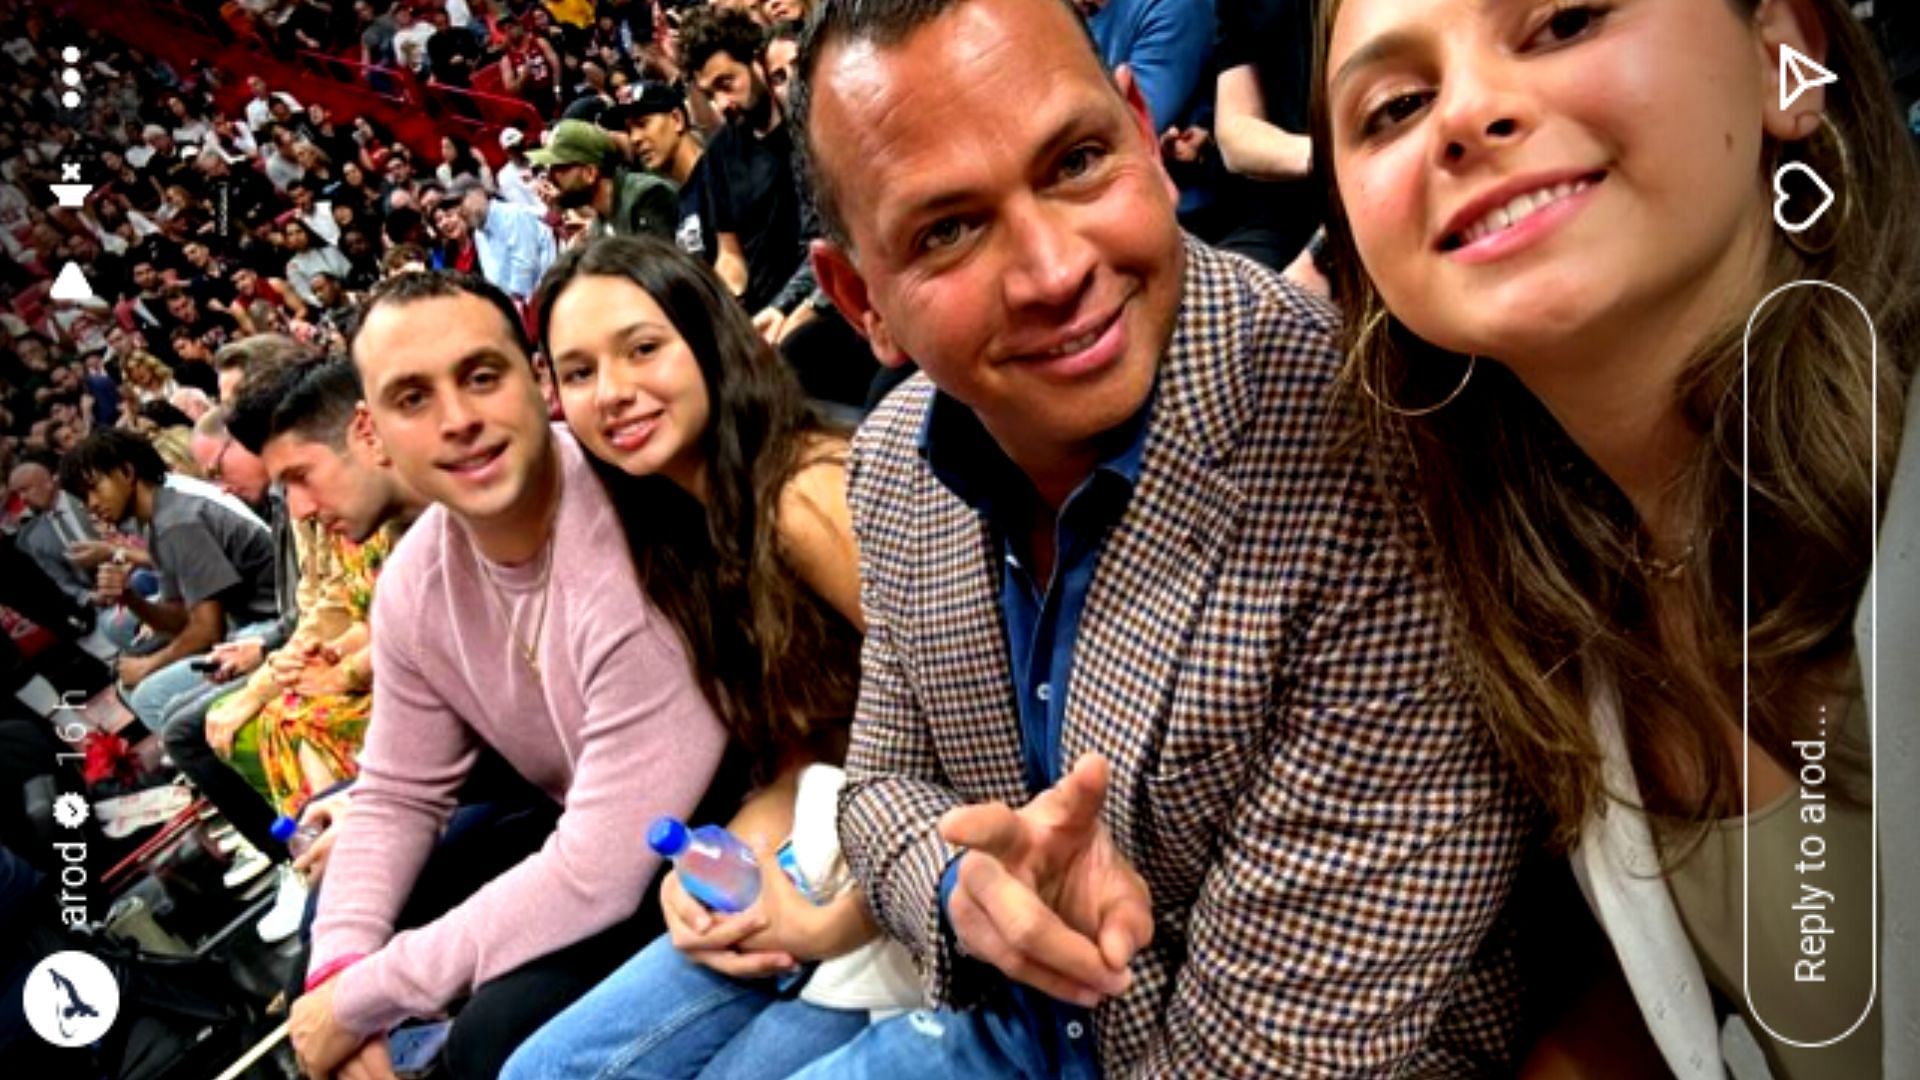 Alex Rodriguez with his two daughters and nephew at an NBA game.